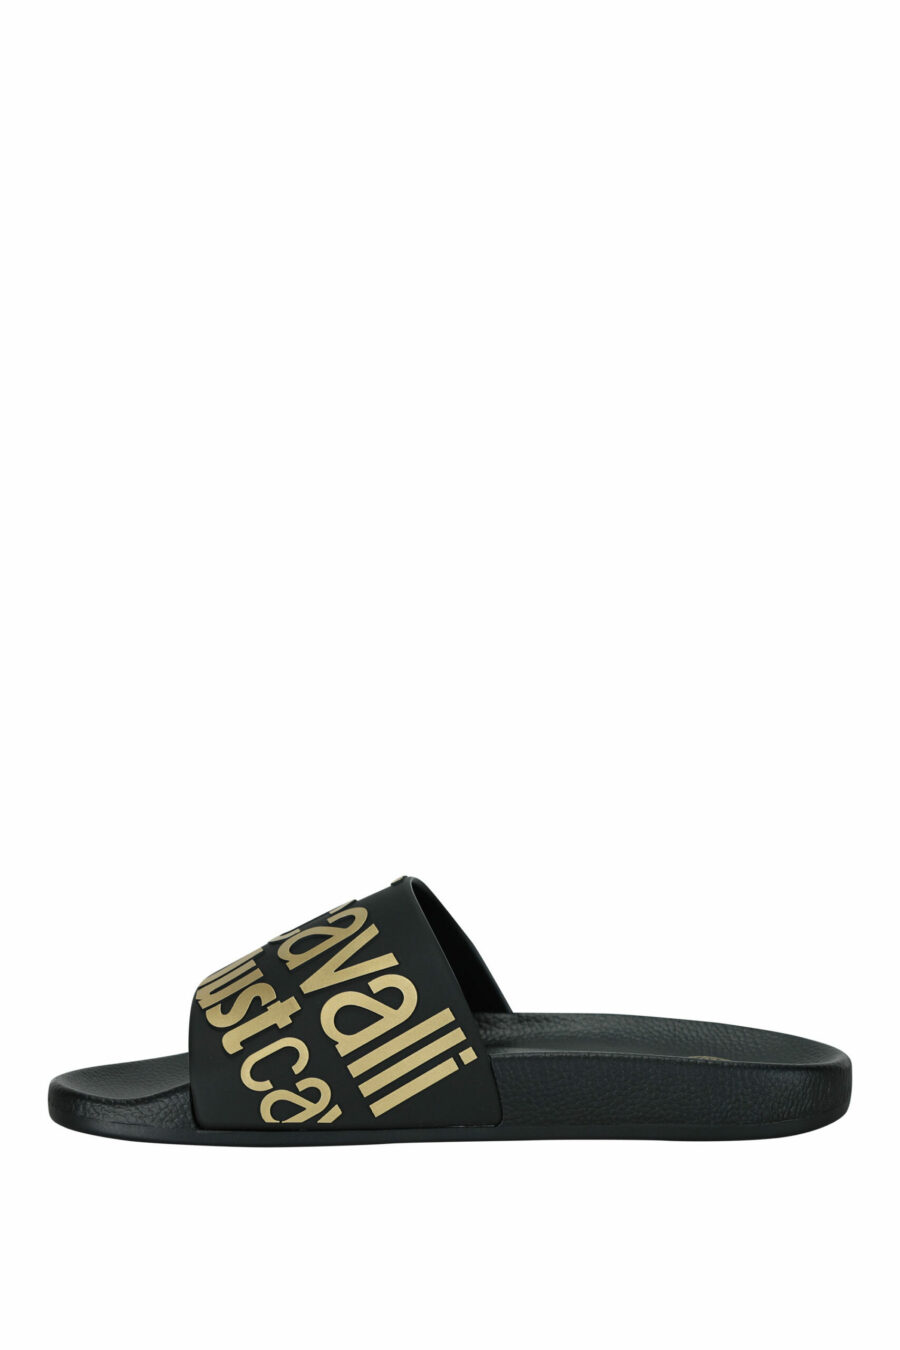 Black flip flops with gold "all over logo just cavalli" maxilogo - 8052672697158 2 scaled